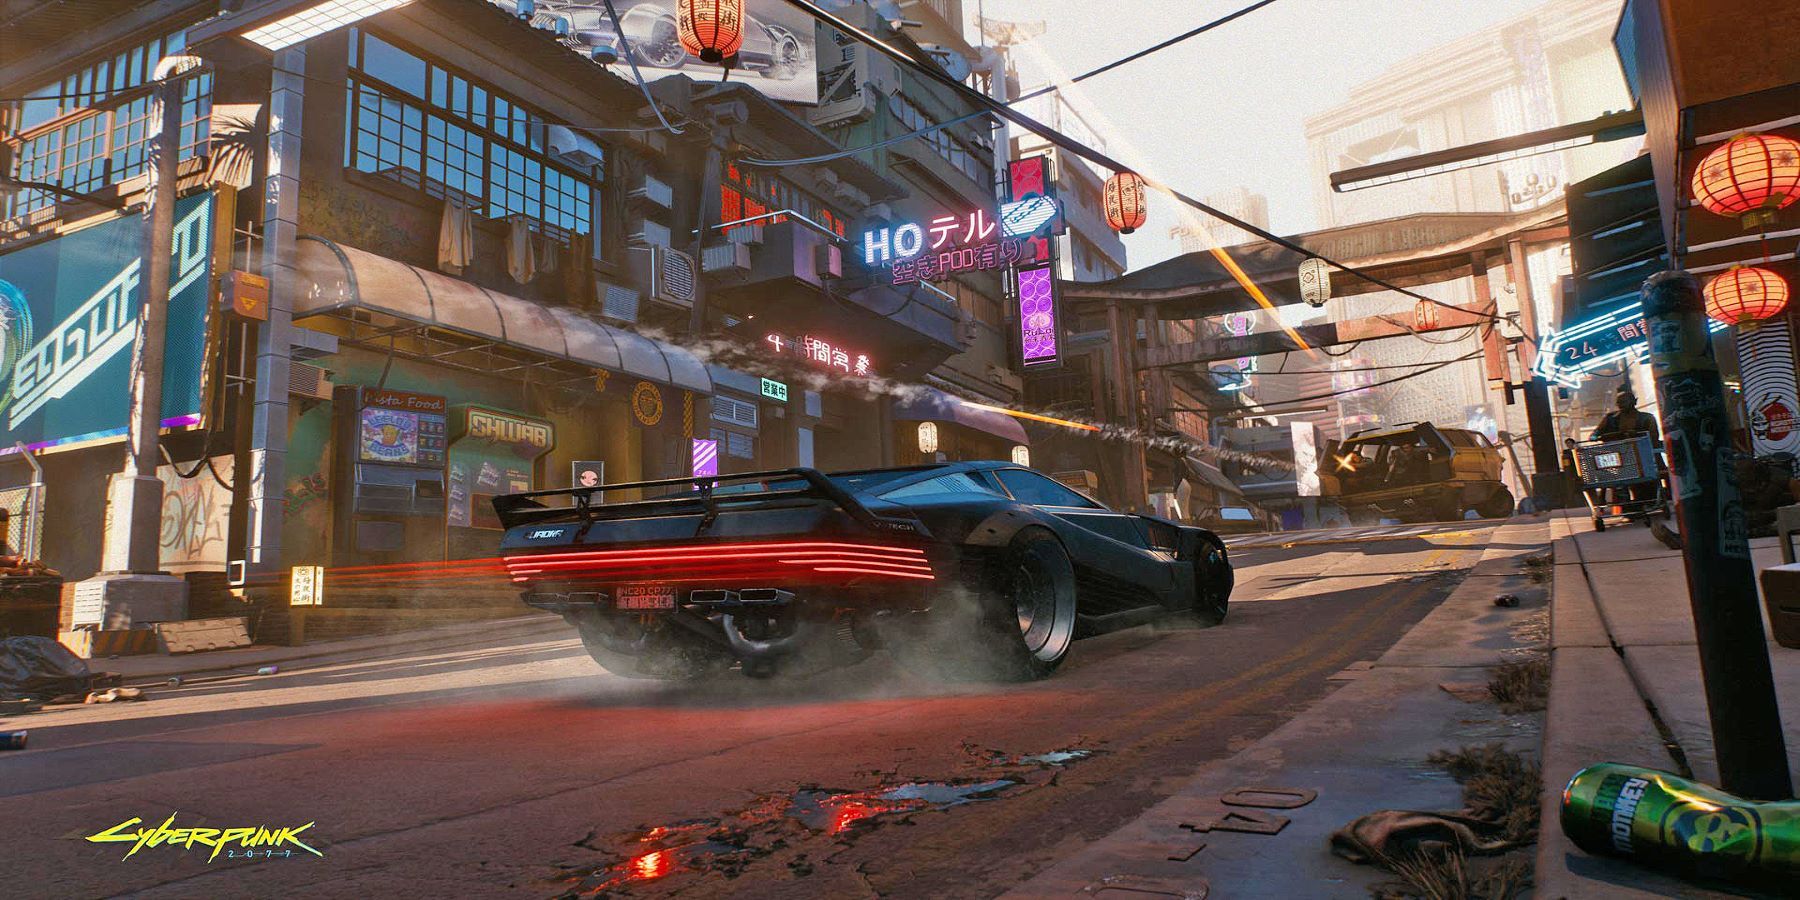 Cyberpunk 2077 Video Shows That the Game Is Still Having Major Issues on Older Consoles, Even After 1.3 Update